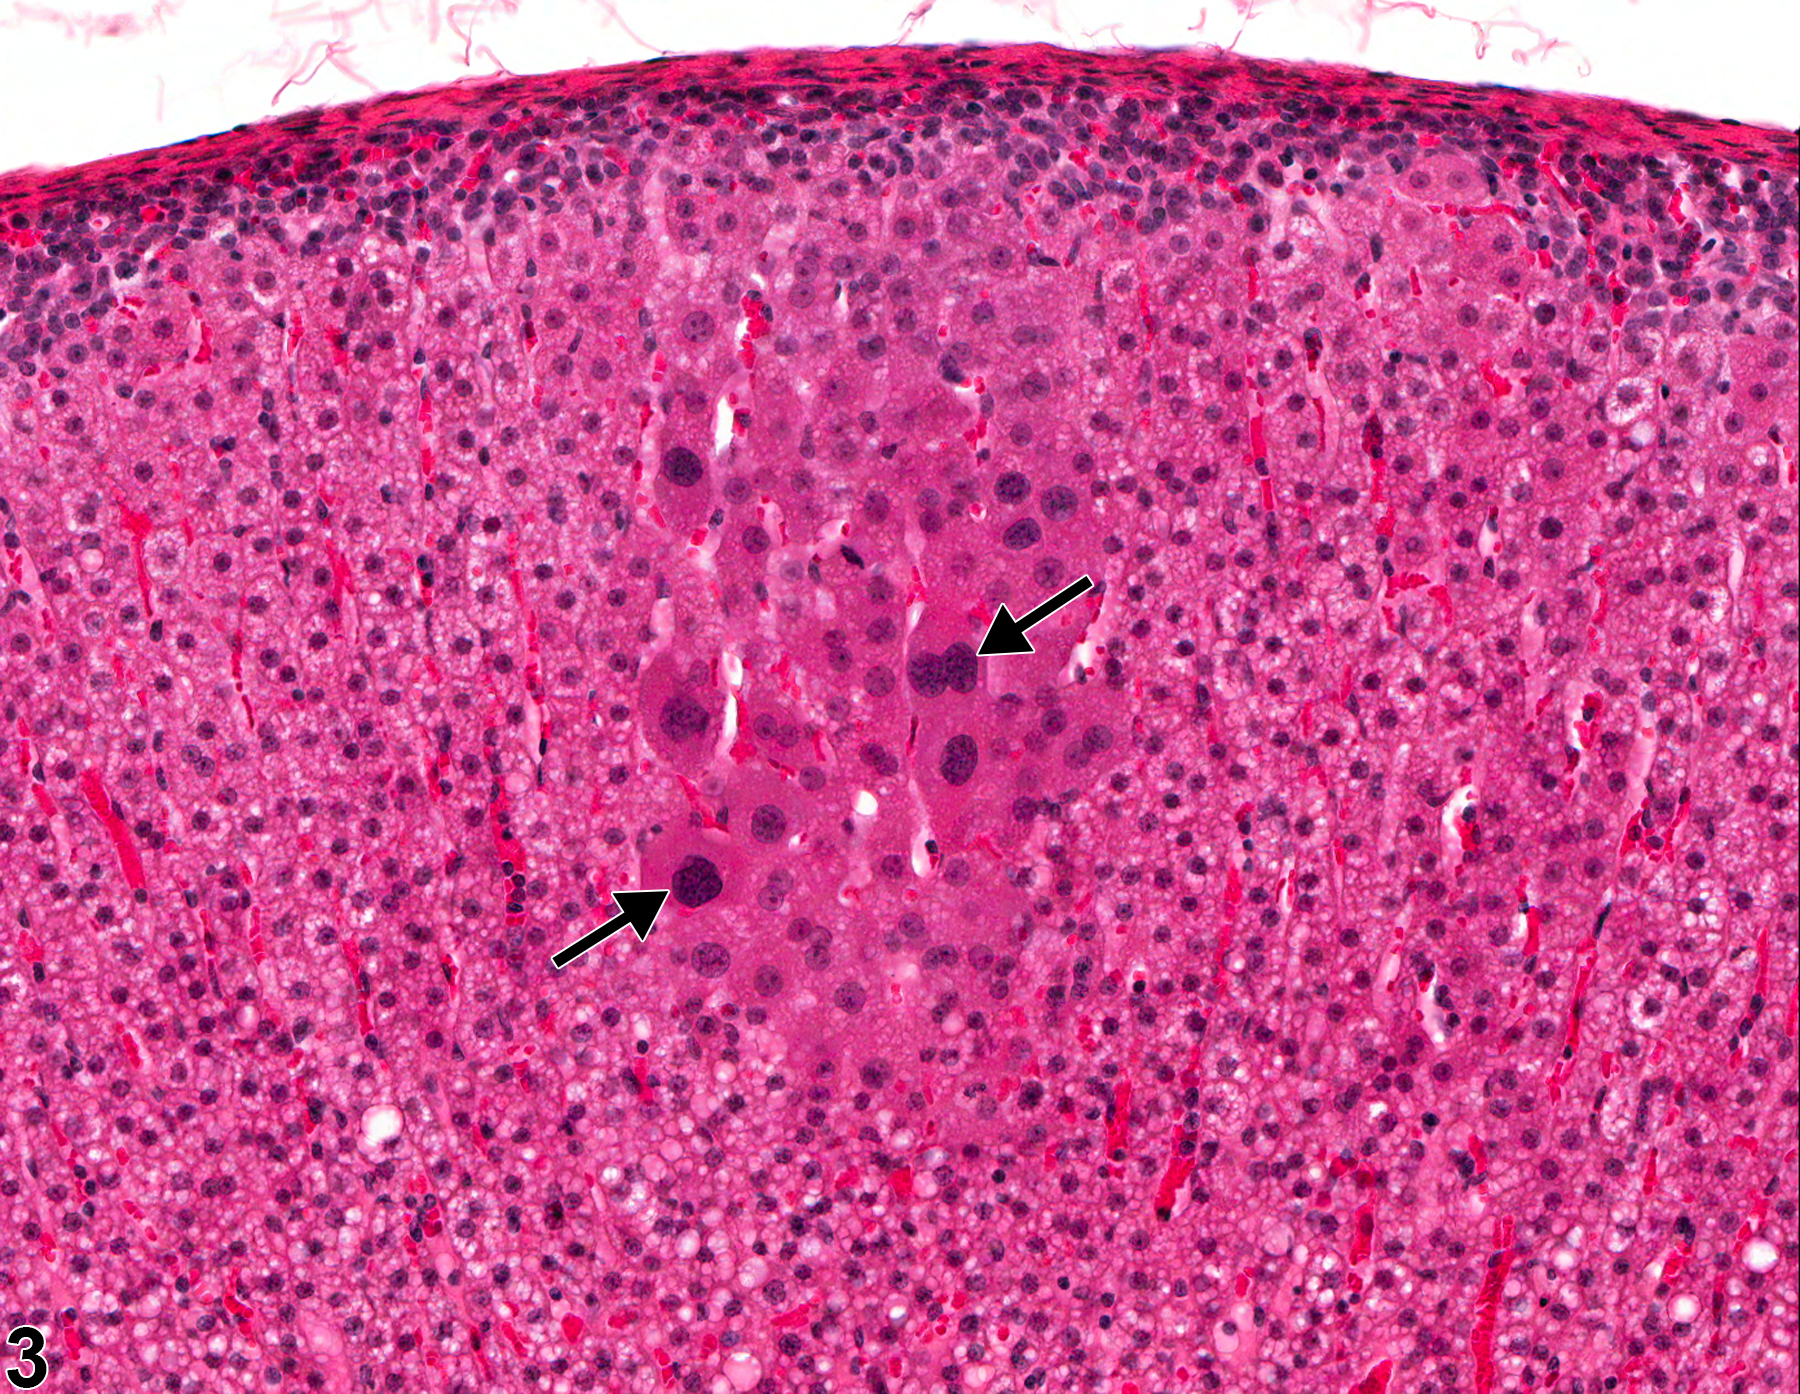 Image of cellular atypia in the adrenal gland cortex from a male F344/N rat in a chronic study